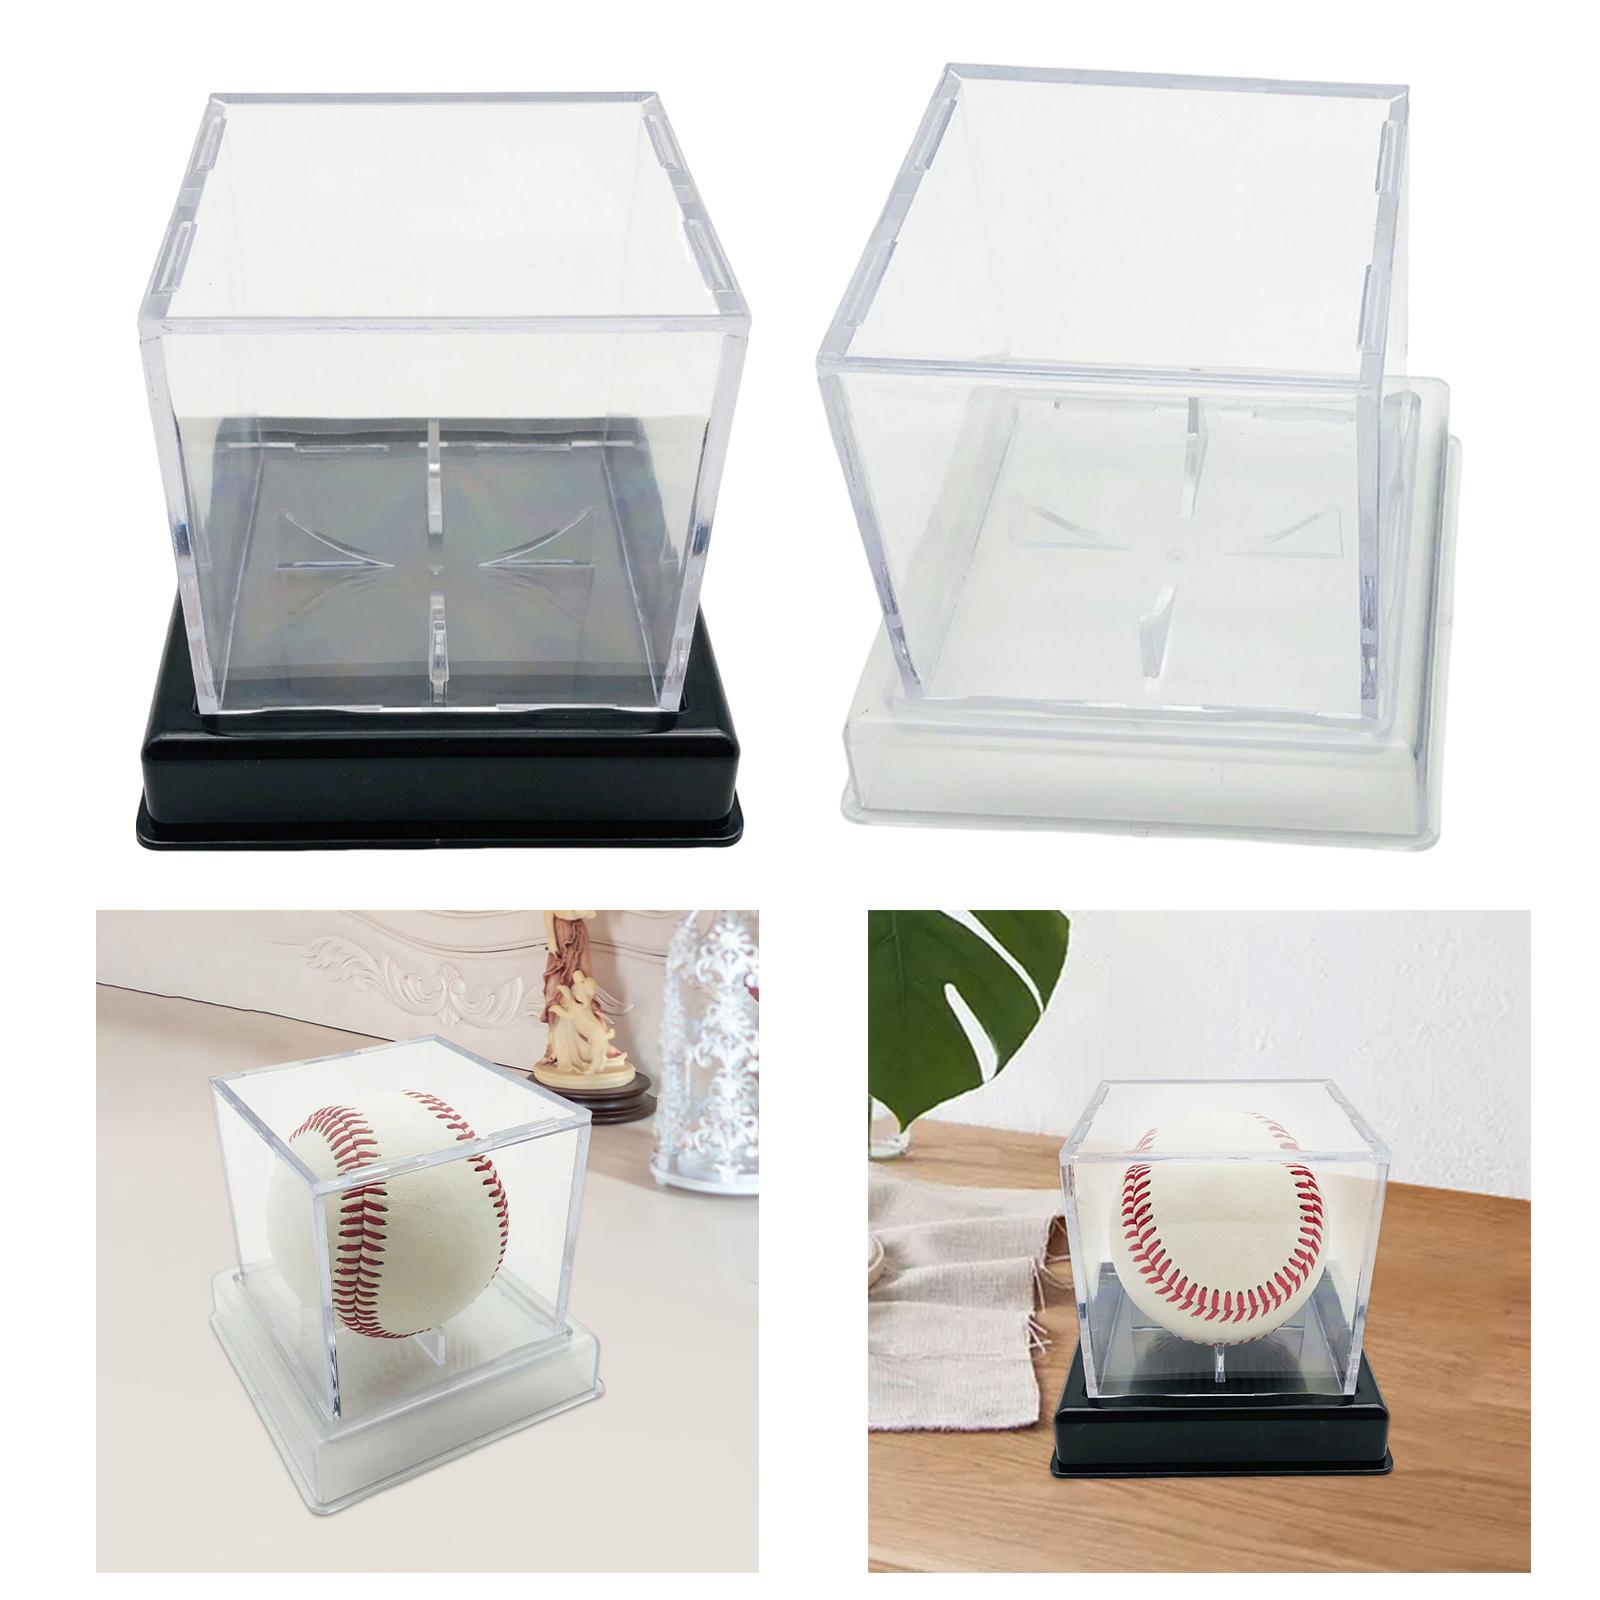 Clear Square Display Case Baseball Display Case for Doll Living Room Jewelry Black Bottom